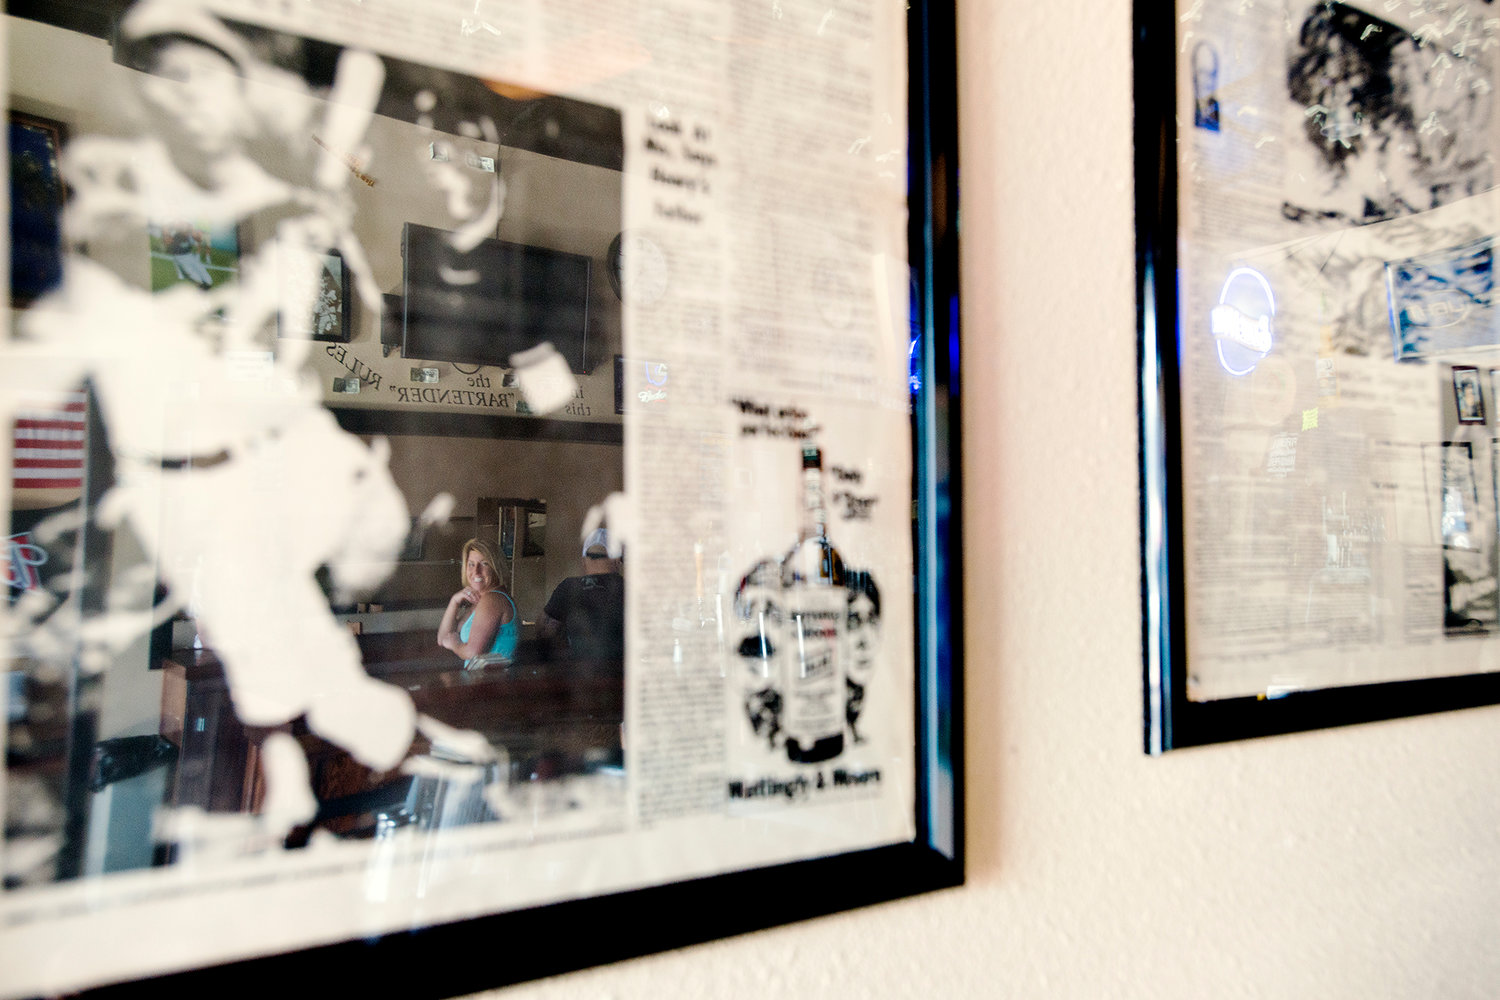 Marianne Viggers is seen in the reflection of a framed newspaper sports page featuring Hank Aaron's famous 715th home run which was donated by a local patron.